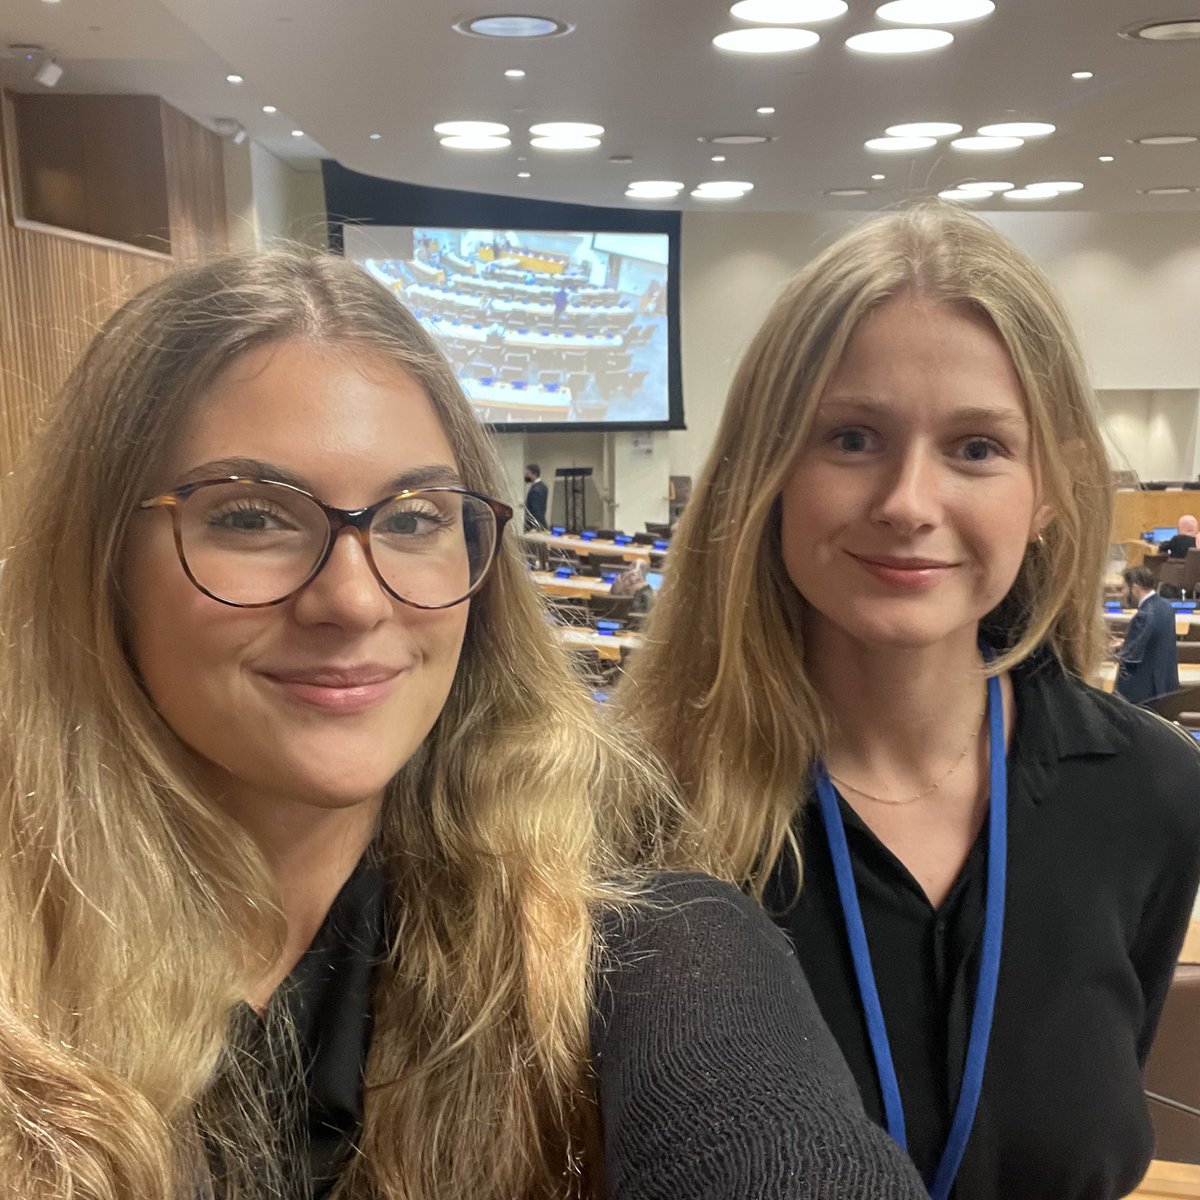 The UN’s Women Conference #CSW will take place i a few days! 🇺🇳

For the first time, there will be EU youth delegates at the conference, representing young europeans!🇪🇺

You can read more about @nadia_g_c and @LKarnelutti’s messages for CSW here👇🏻

eeas.europa.eu/delegations/un…